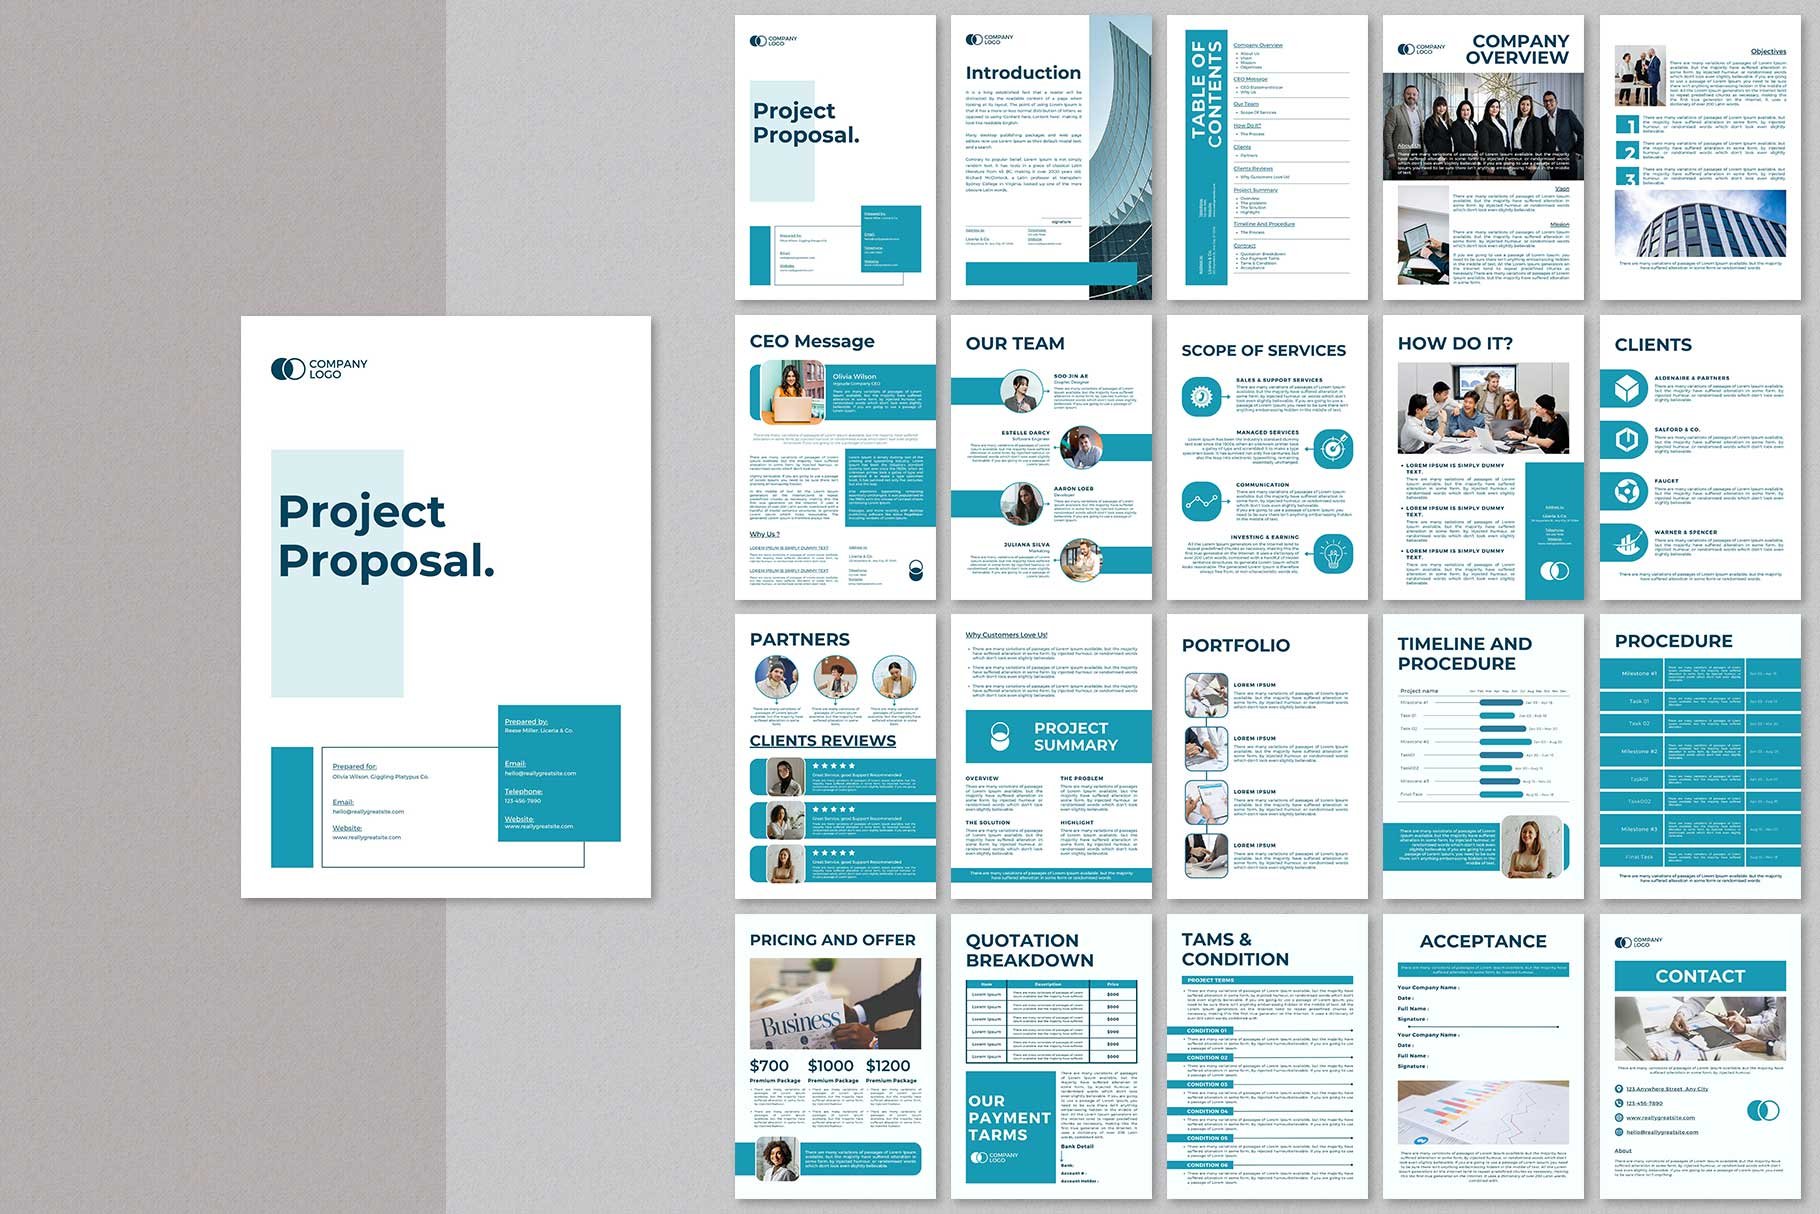 Project Proposal preview image.